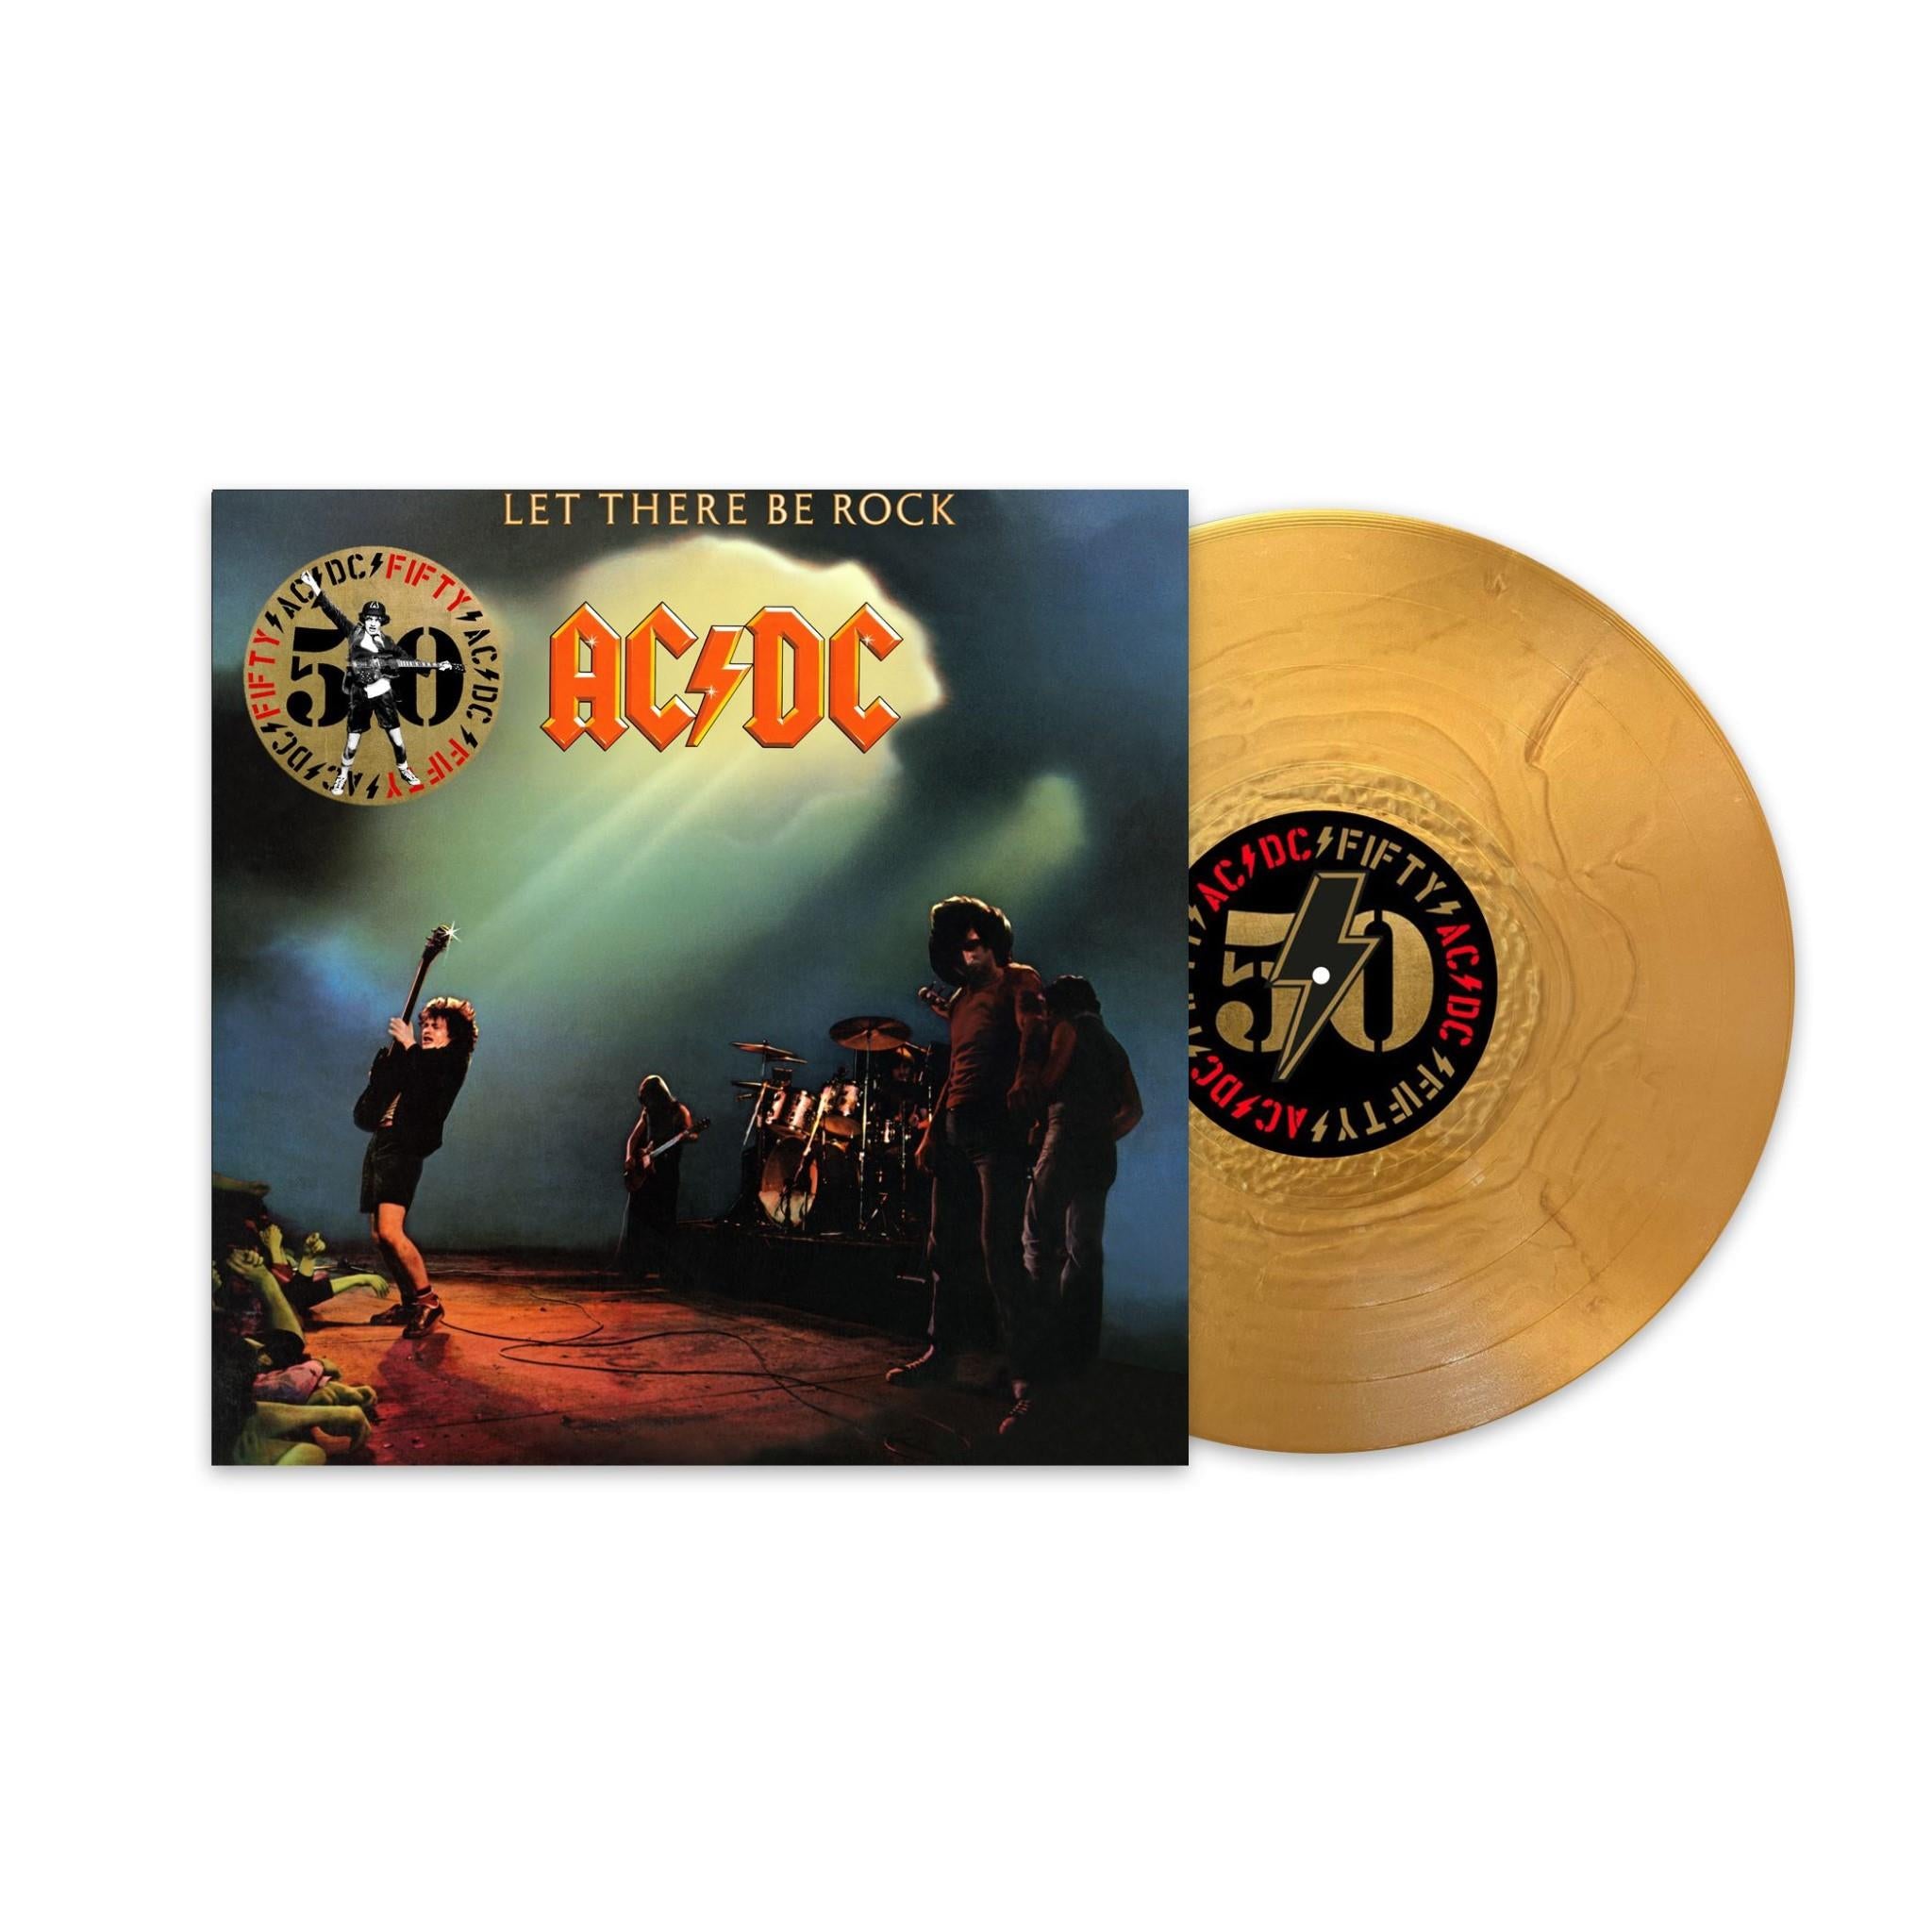 let there be rock (180gm gold nugget vinyl)